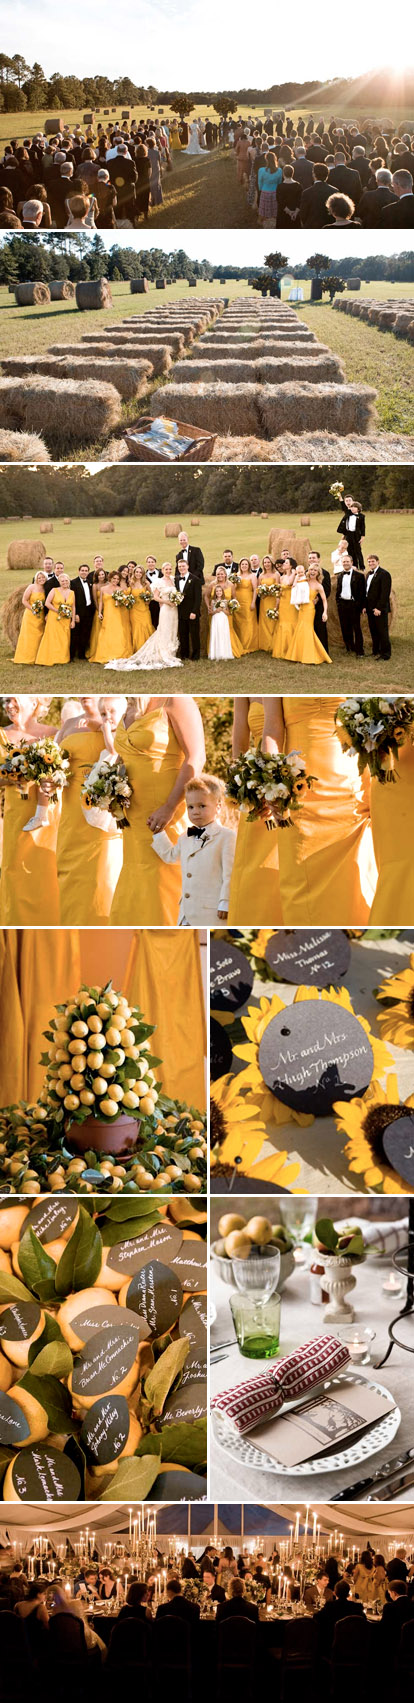 Sophisticated, elegant Southern real wedding in black, white, lemon yellow and green, by Fete